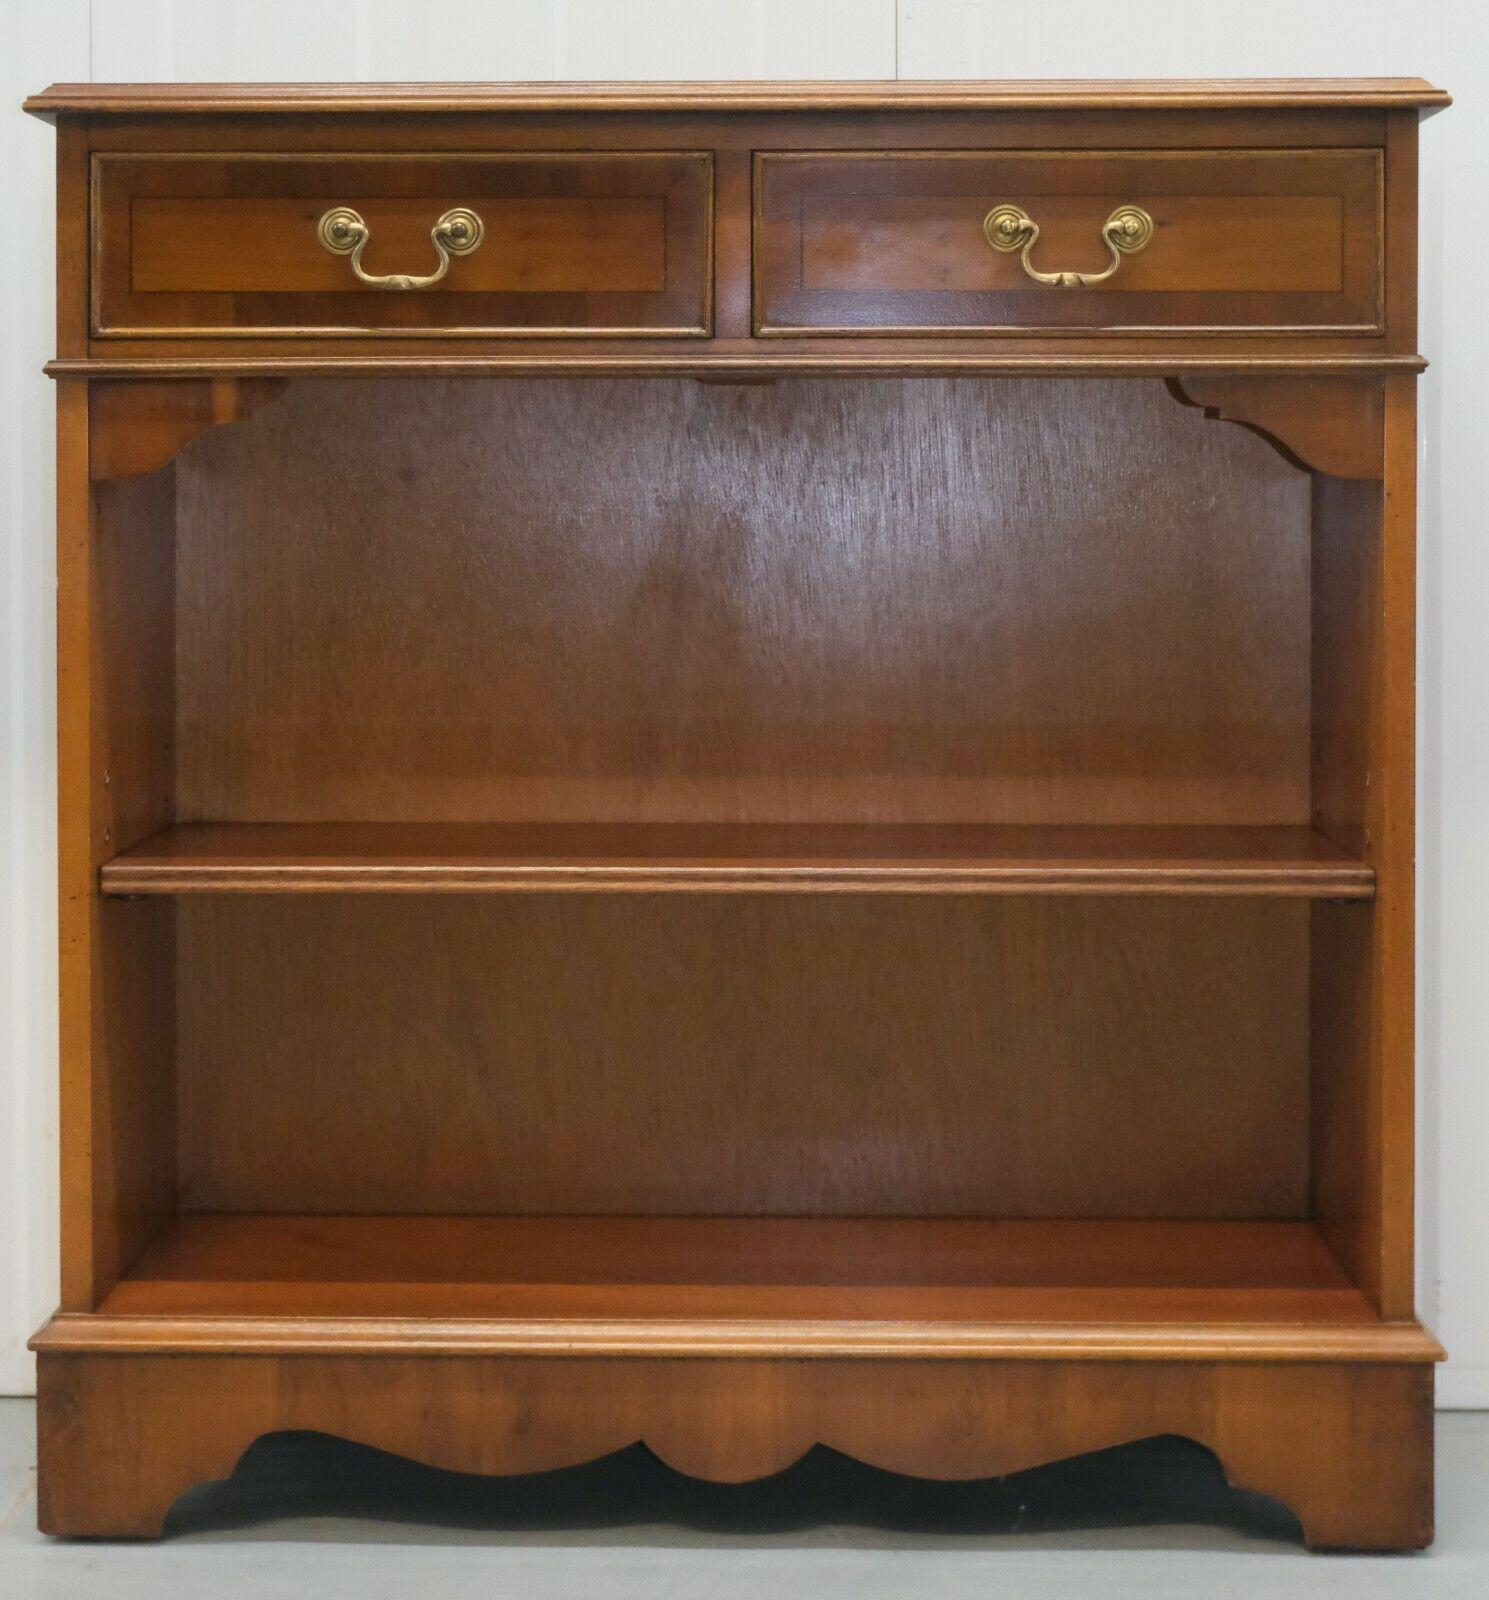 We are delighted to offer for sale this gorgeous Vintage yew wood dwarf open bookcase with twin drawers.

Its a well presented item, with drawers that run smoothly and height-adjustable shelf, giving you plenty of storage. Thanks to its size, they